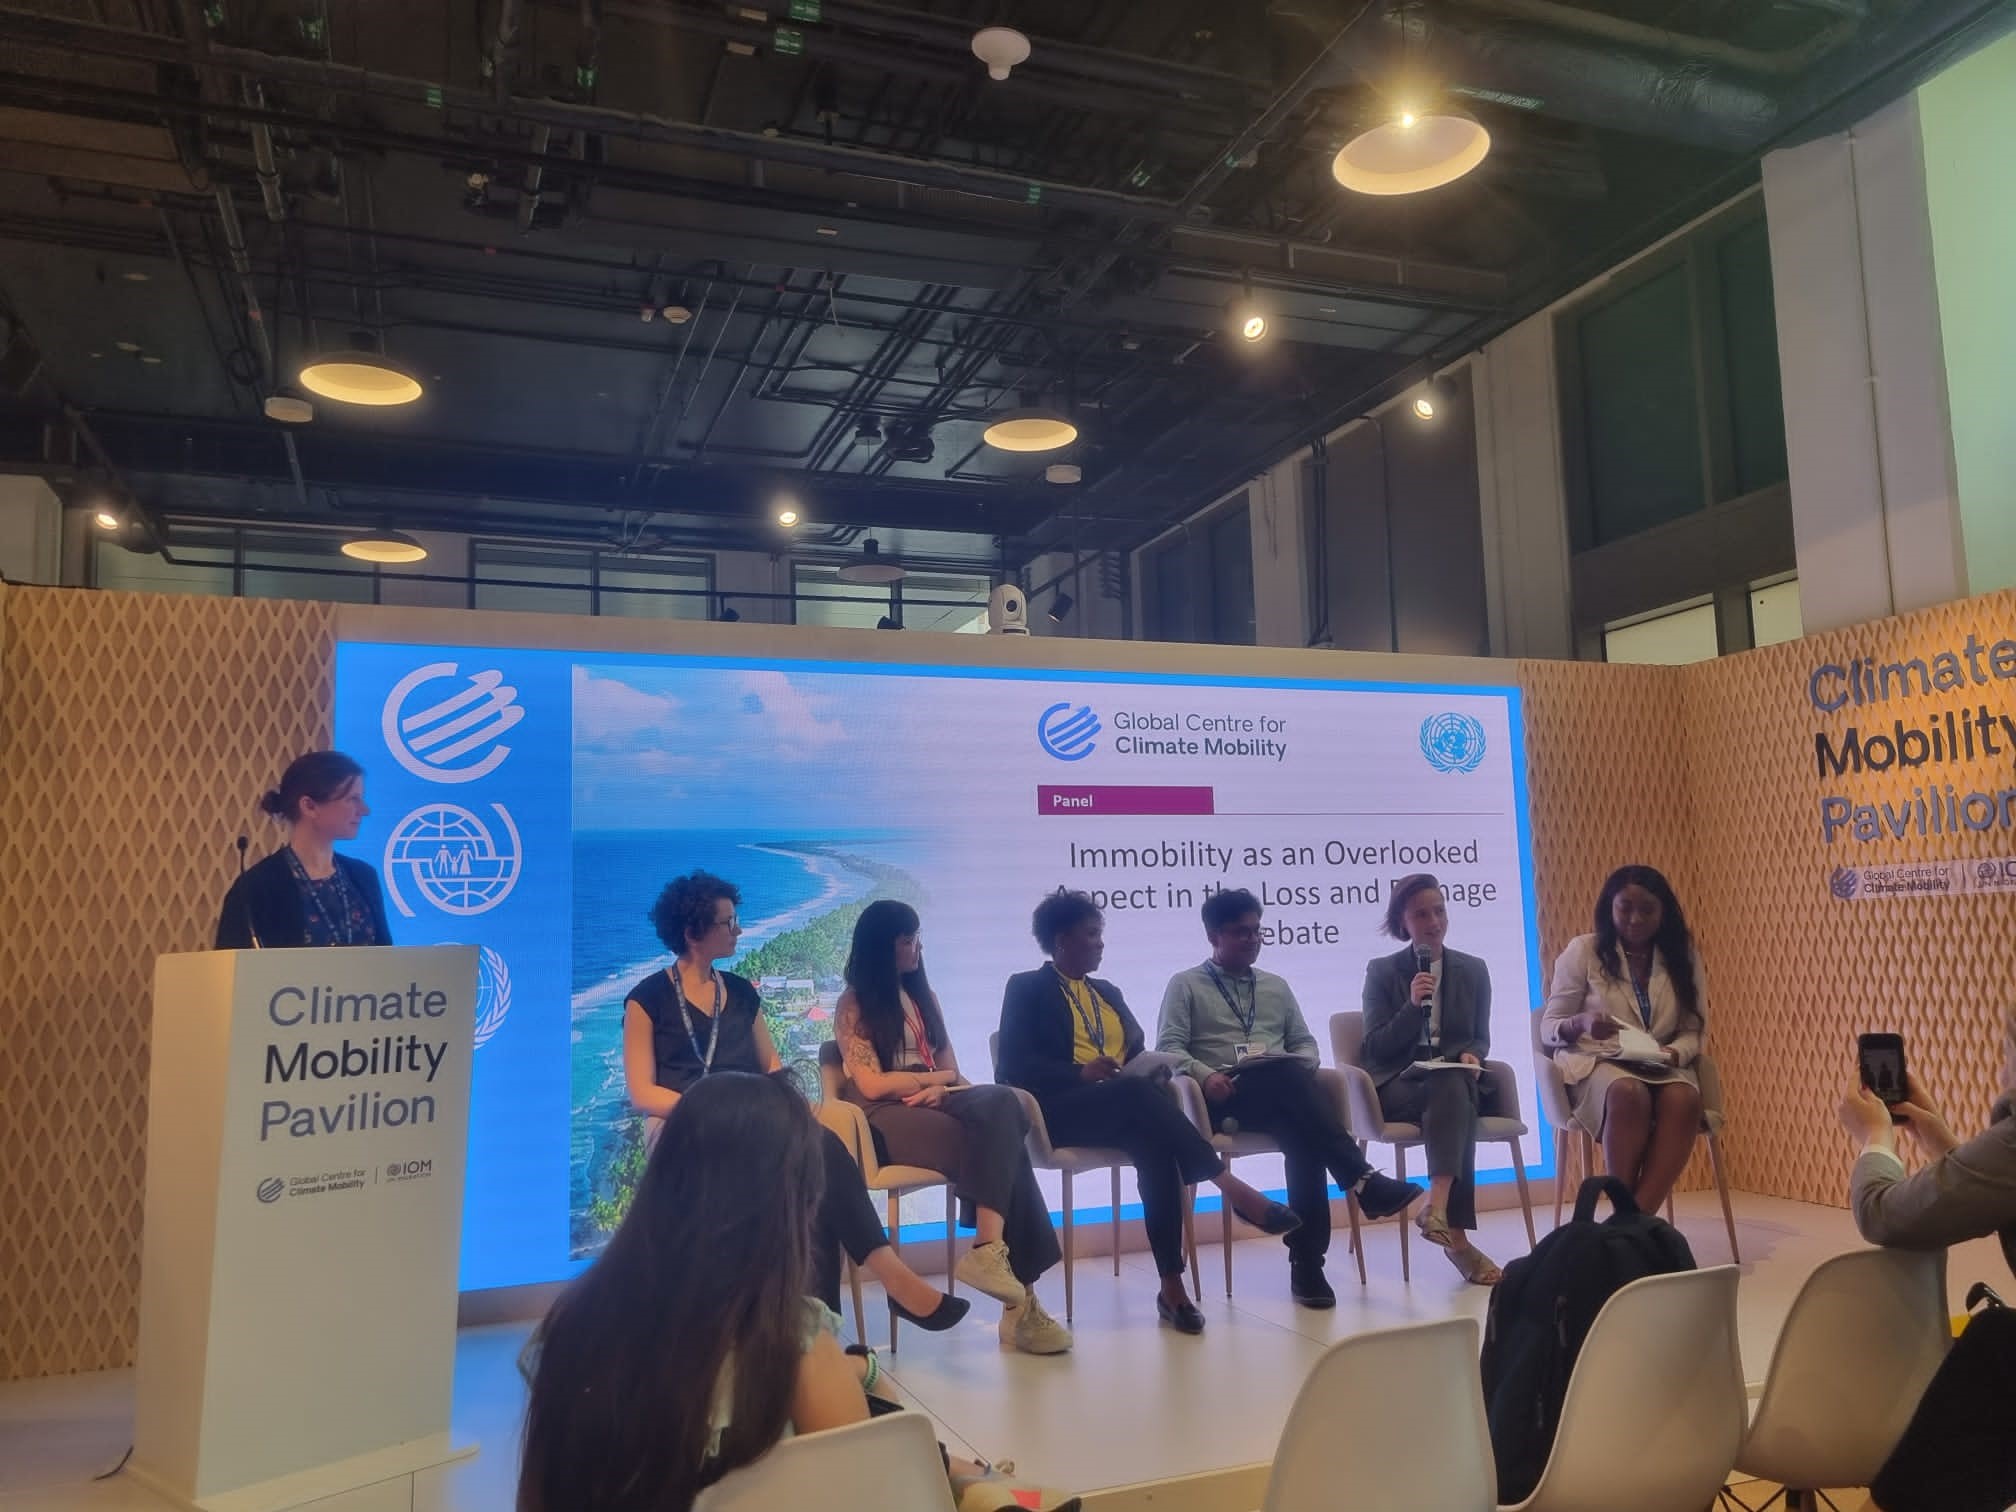 Photo: Cop28 Side Event, Panel of the 6 panelists sitting on stage and the moderator standing in front of the speakers podium, POV from the audience towards the panel talking about "Immobility as an overlooked aspect in the loss and damage debate".